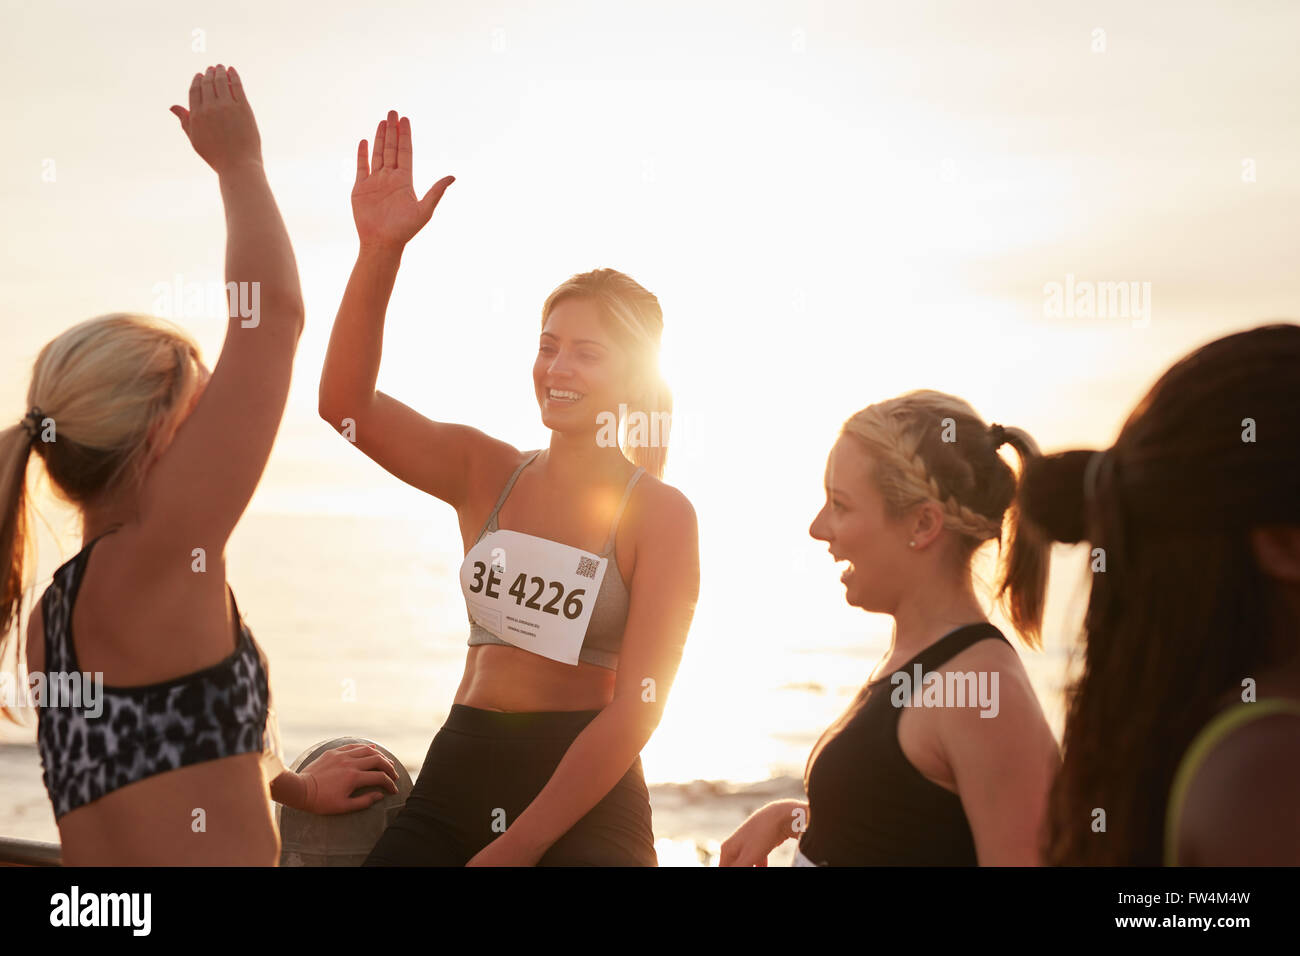 Shot of female runners high fiving each other after a race. Group of athletes giving each other high five after winning competit Stock Photo